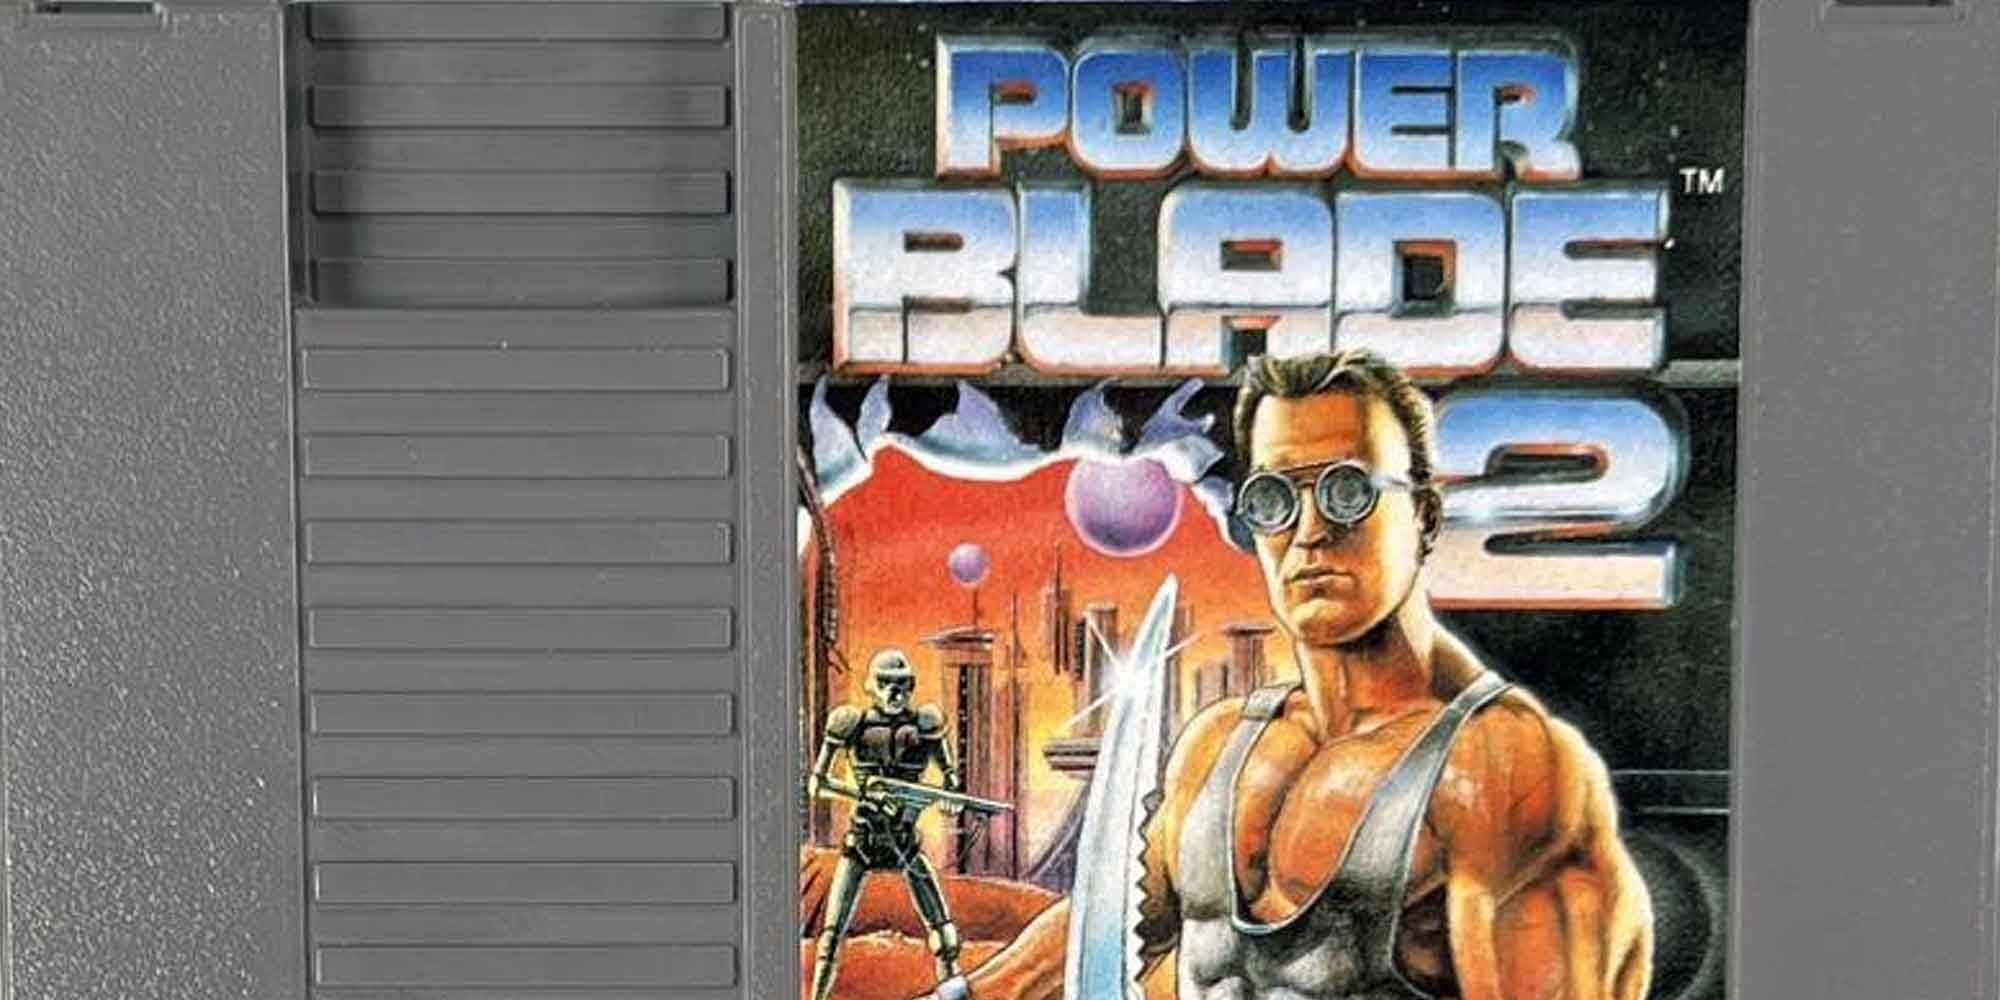 Power Blade 2 cartridge for the NES